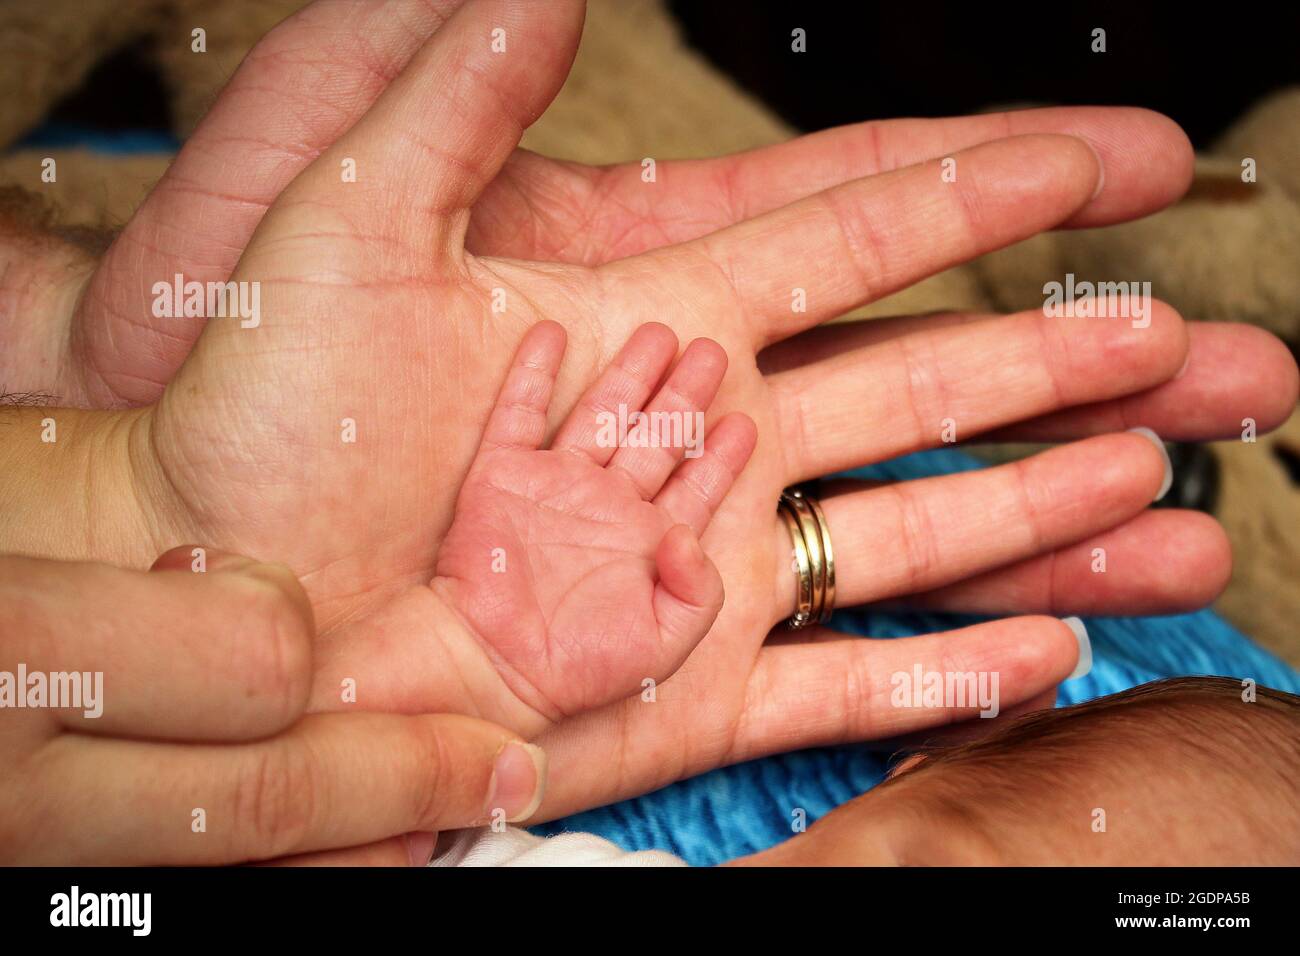 Dad, Mom, and baby hands showing the parents holding the hand that they will guide thru life Stock Photo